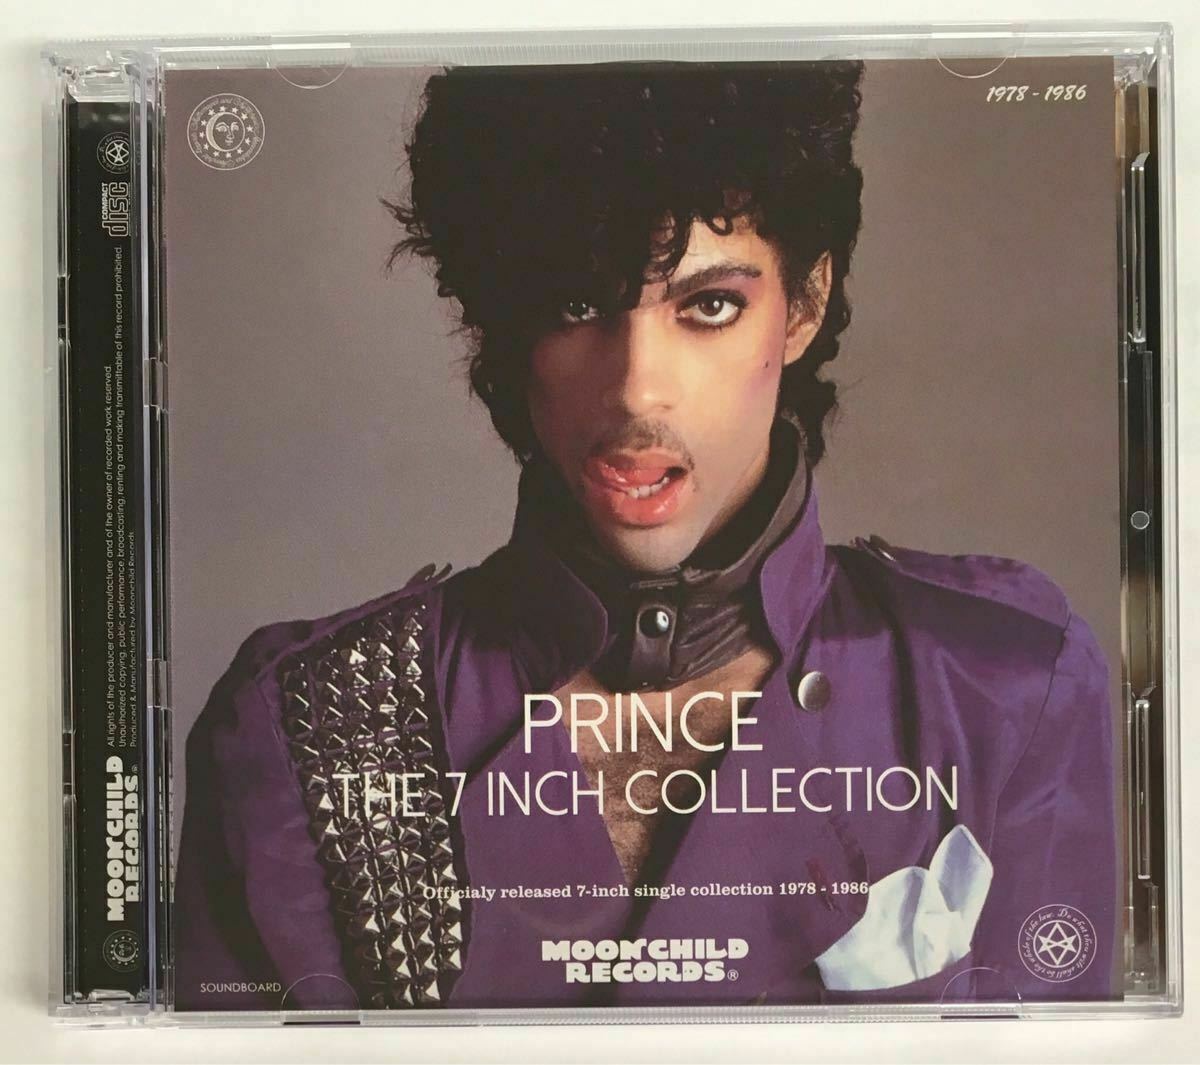 Prince The 7 inch Collection 1978-1986 CD 2 Discs Moonchild 